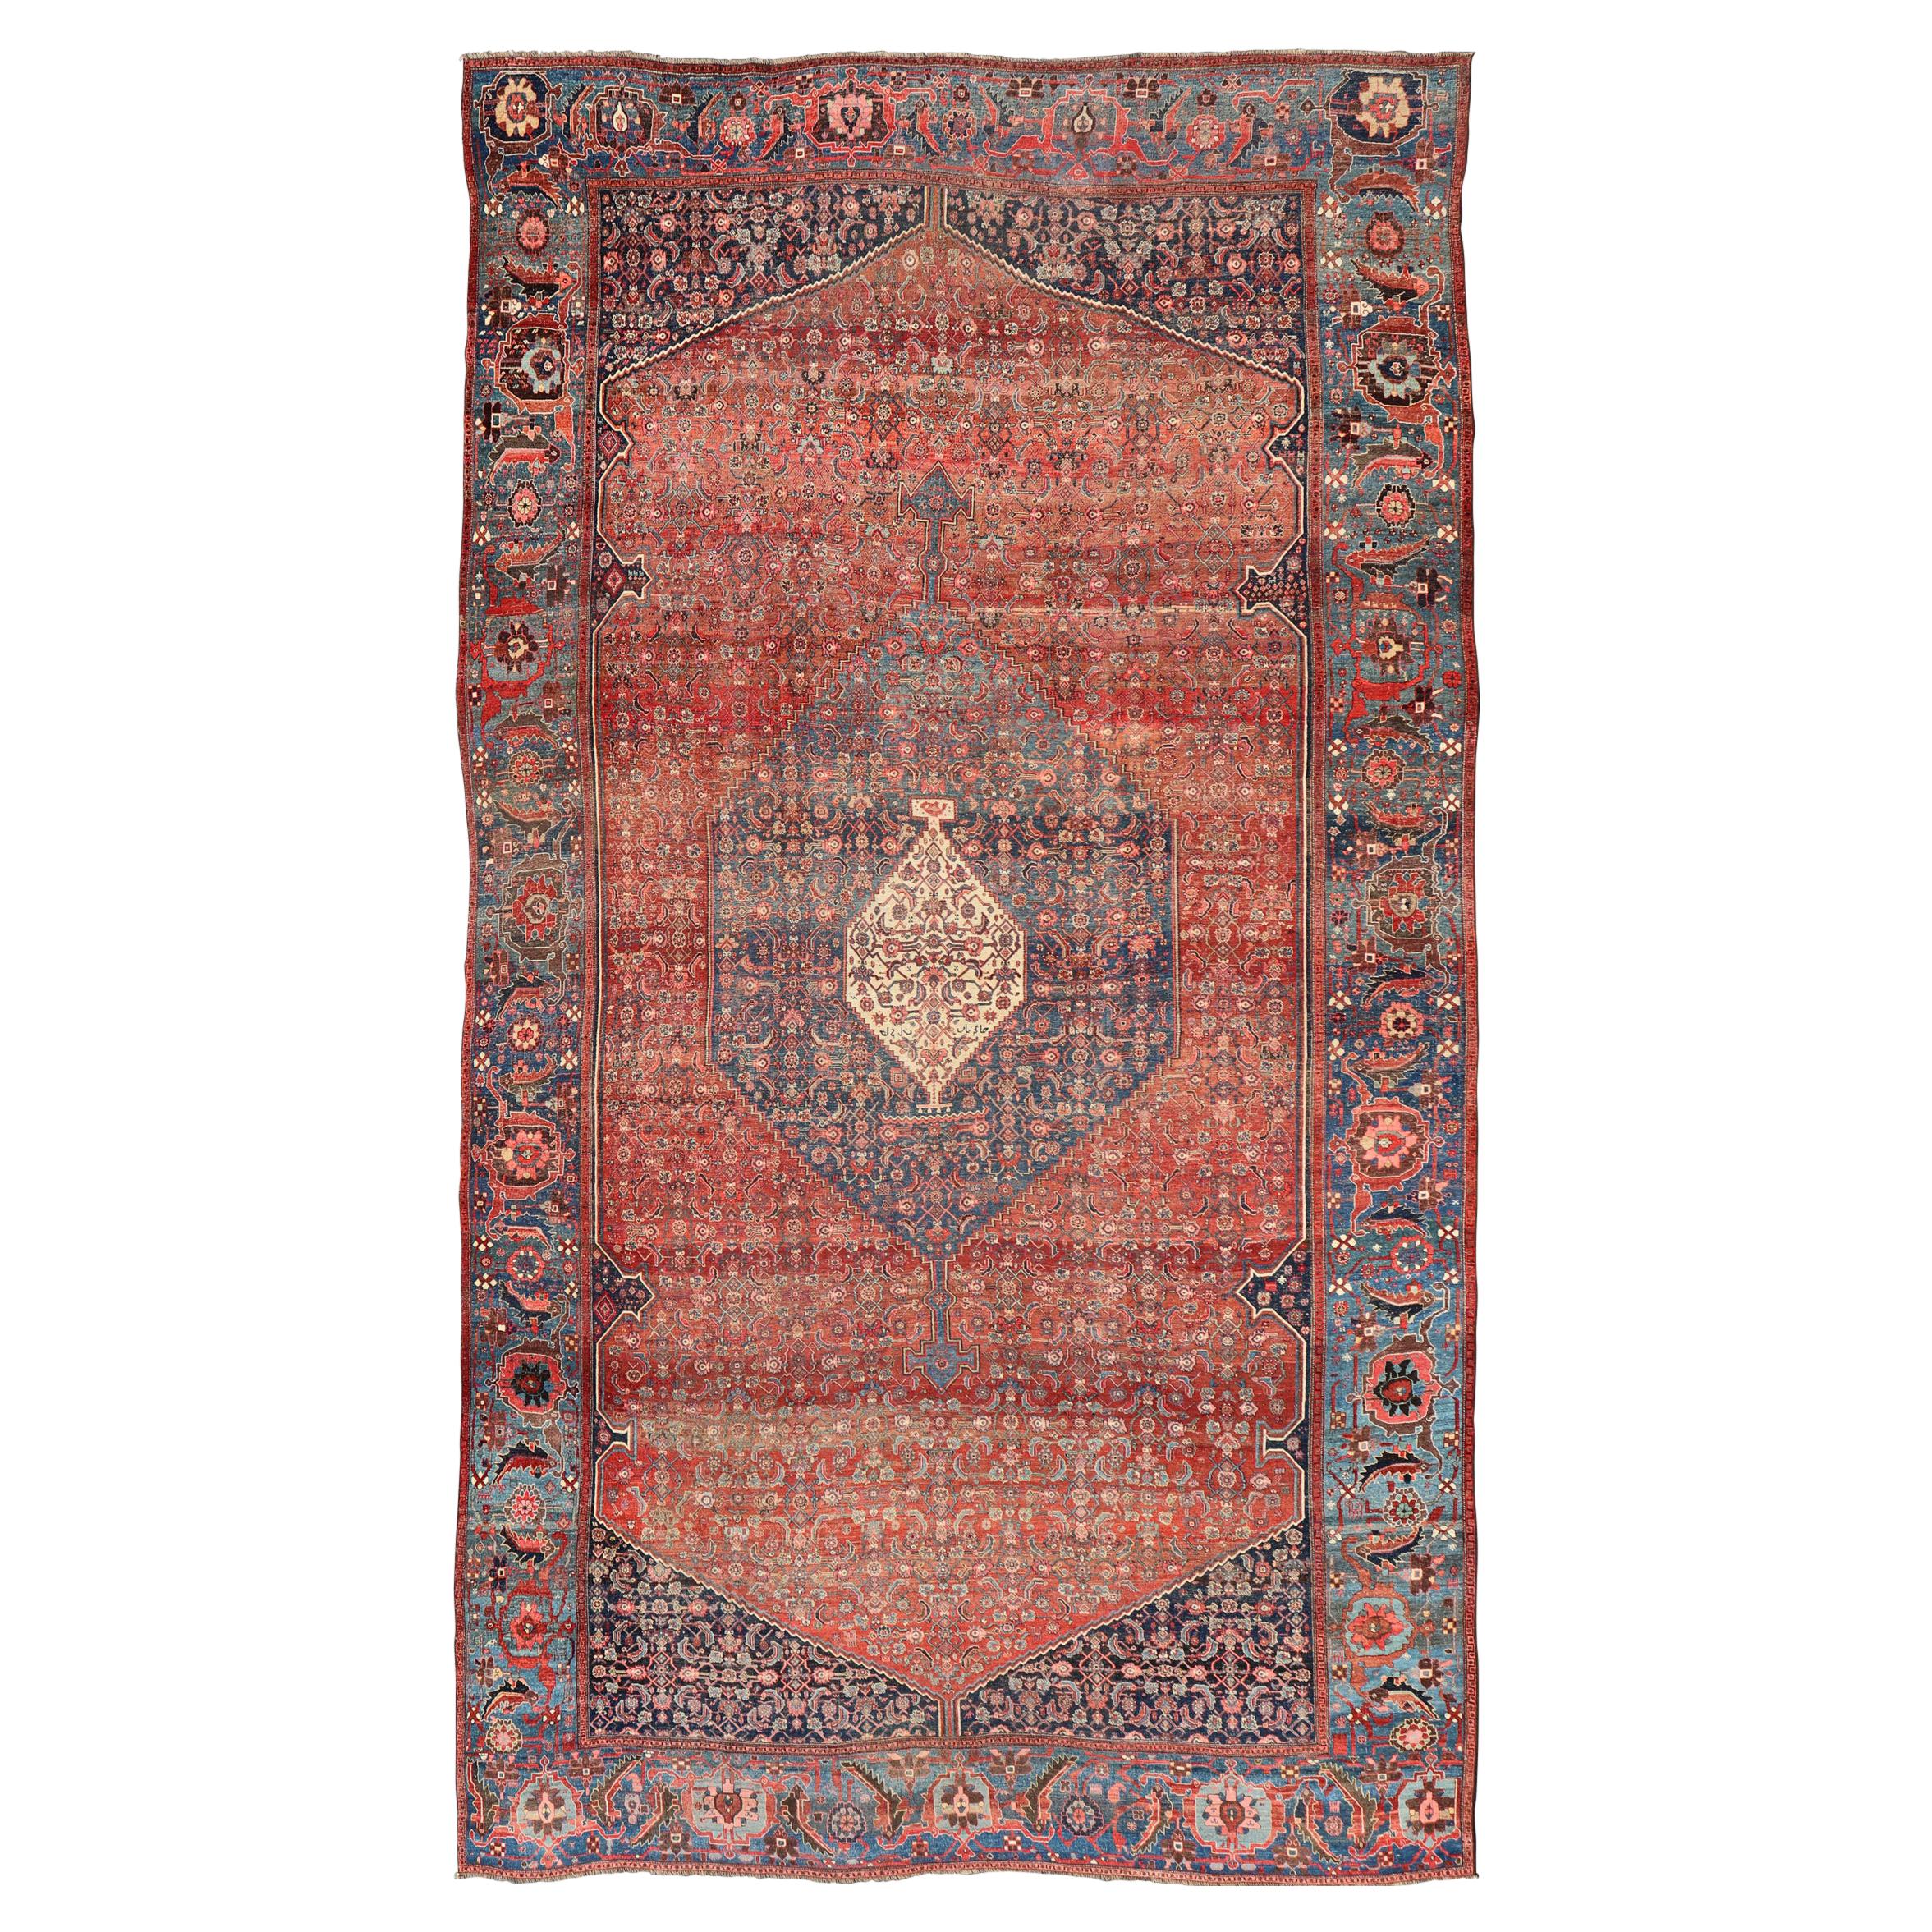 Very Large Antique Persian Bidjar Rug in Multi Shades of Blue, Tera-Cotta & Red For Sale